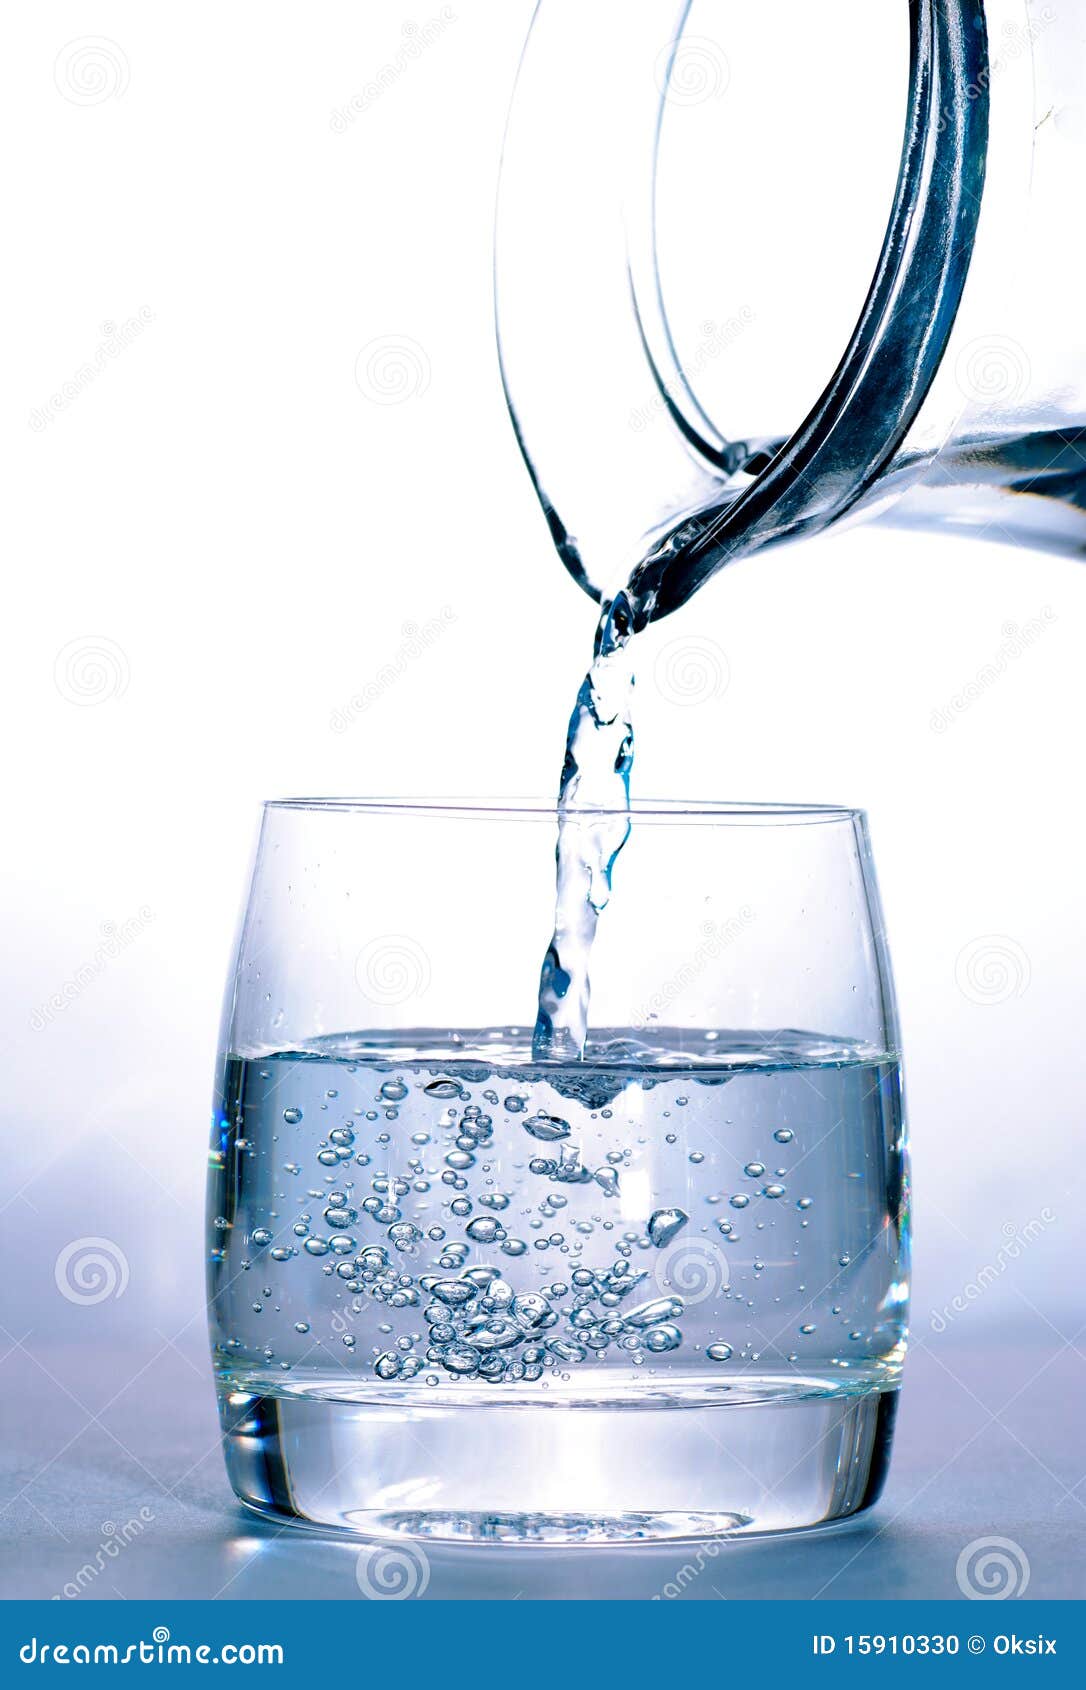 Glass Water Jug Stock Photo, Picture and Royalty Free Image. Image 21094031.